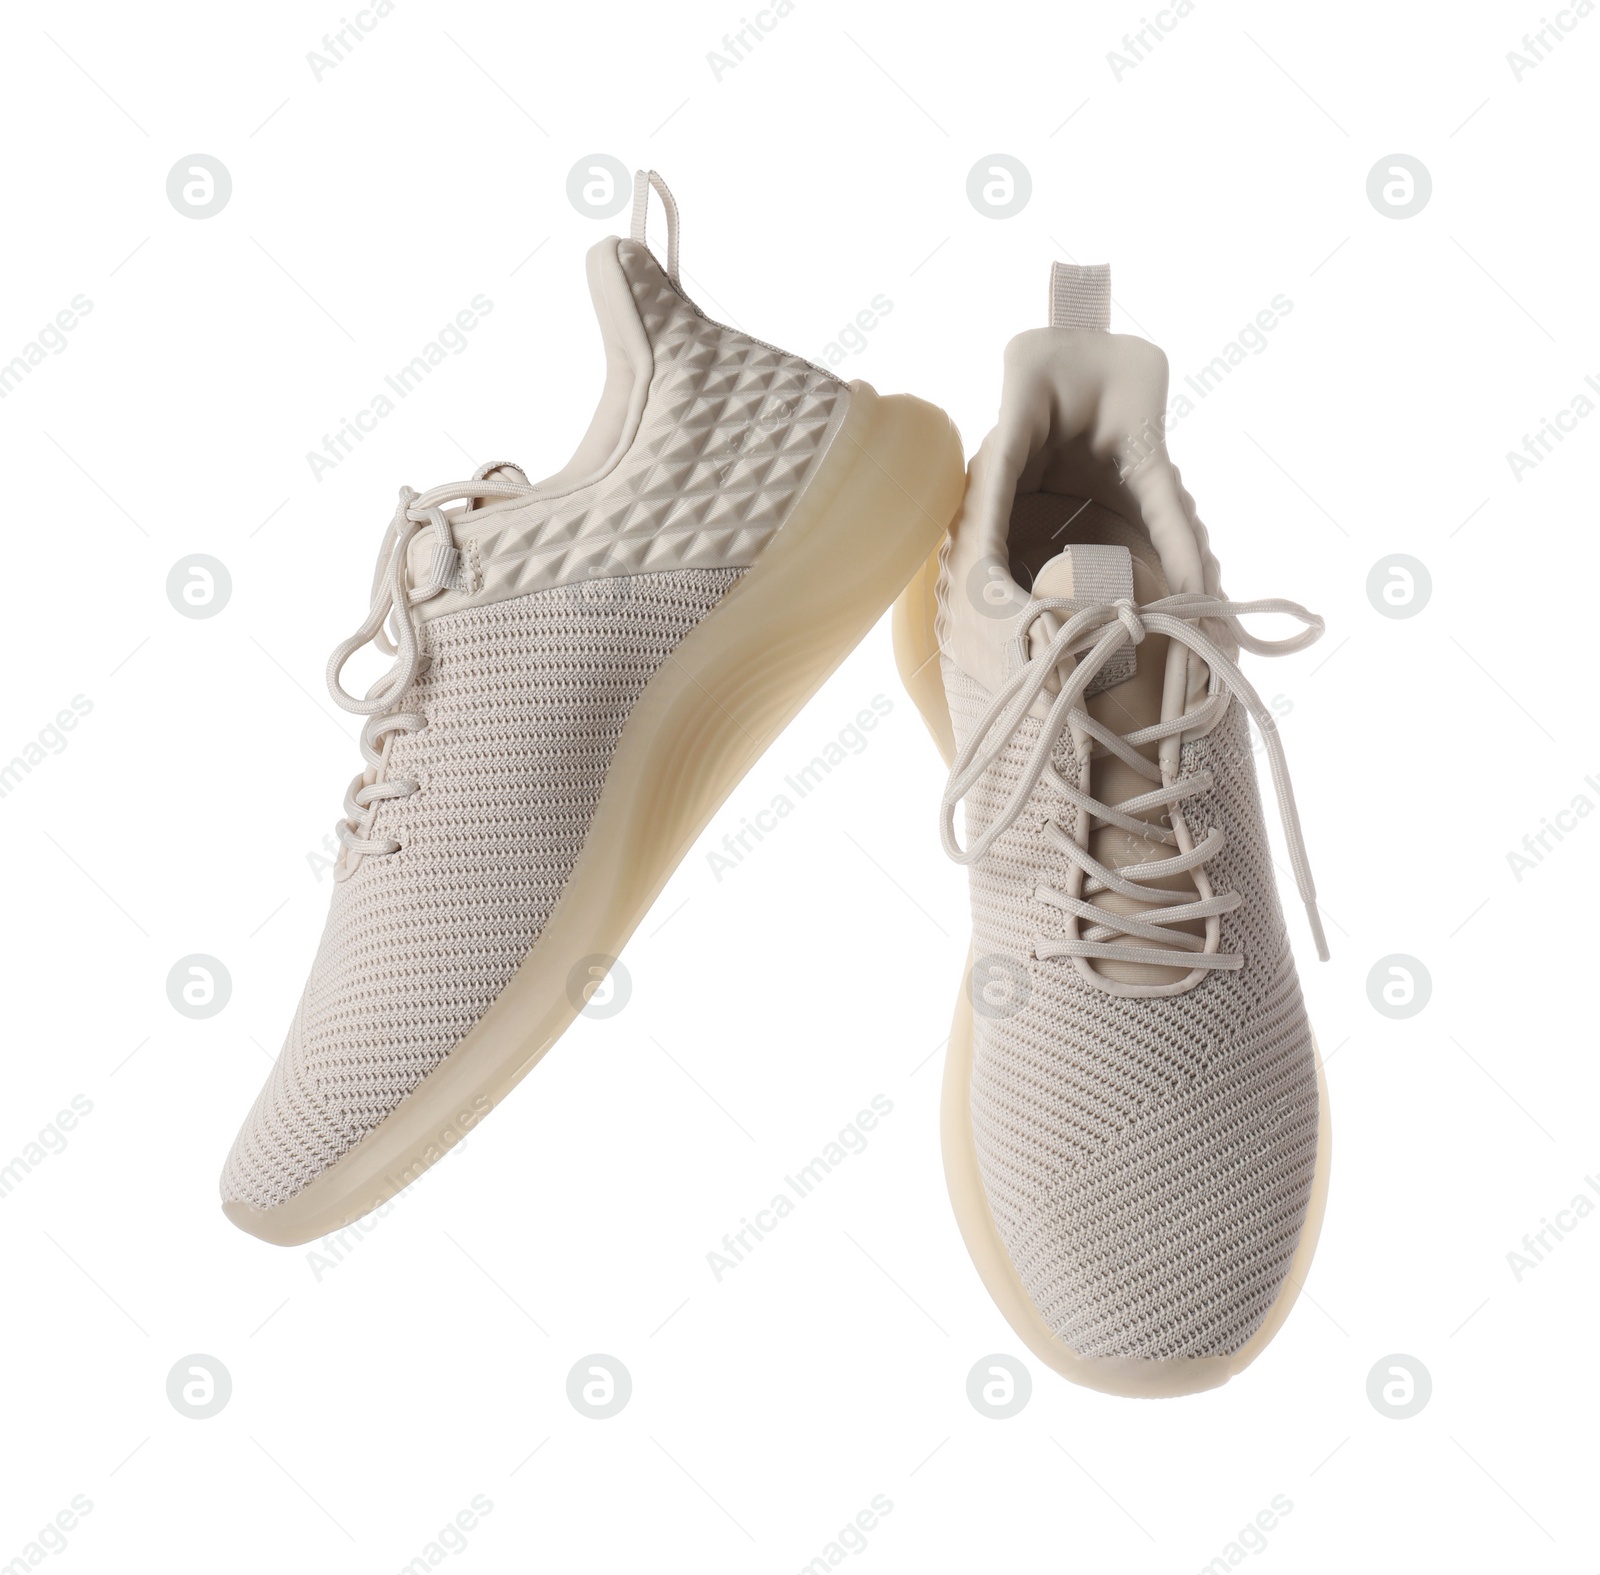 Photo of Pair of stylish sport shoes isolated on white